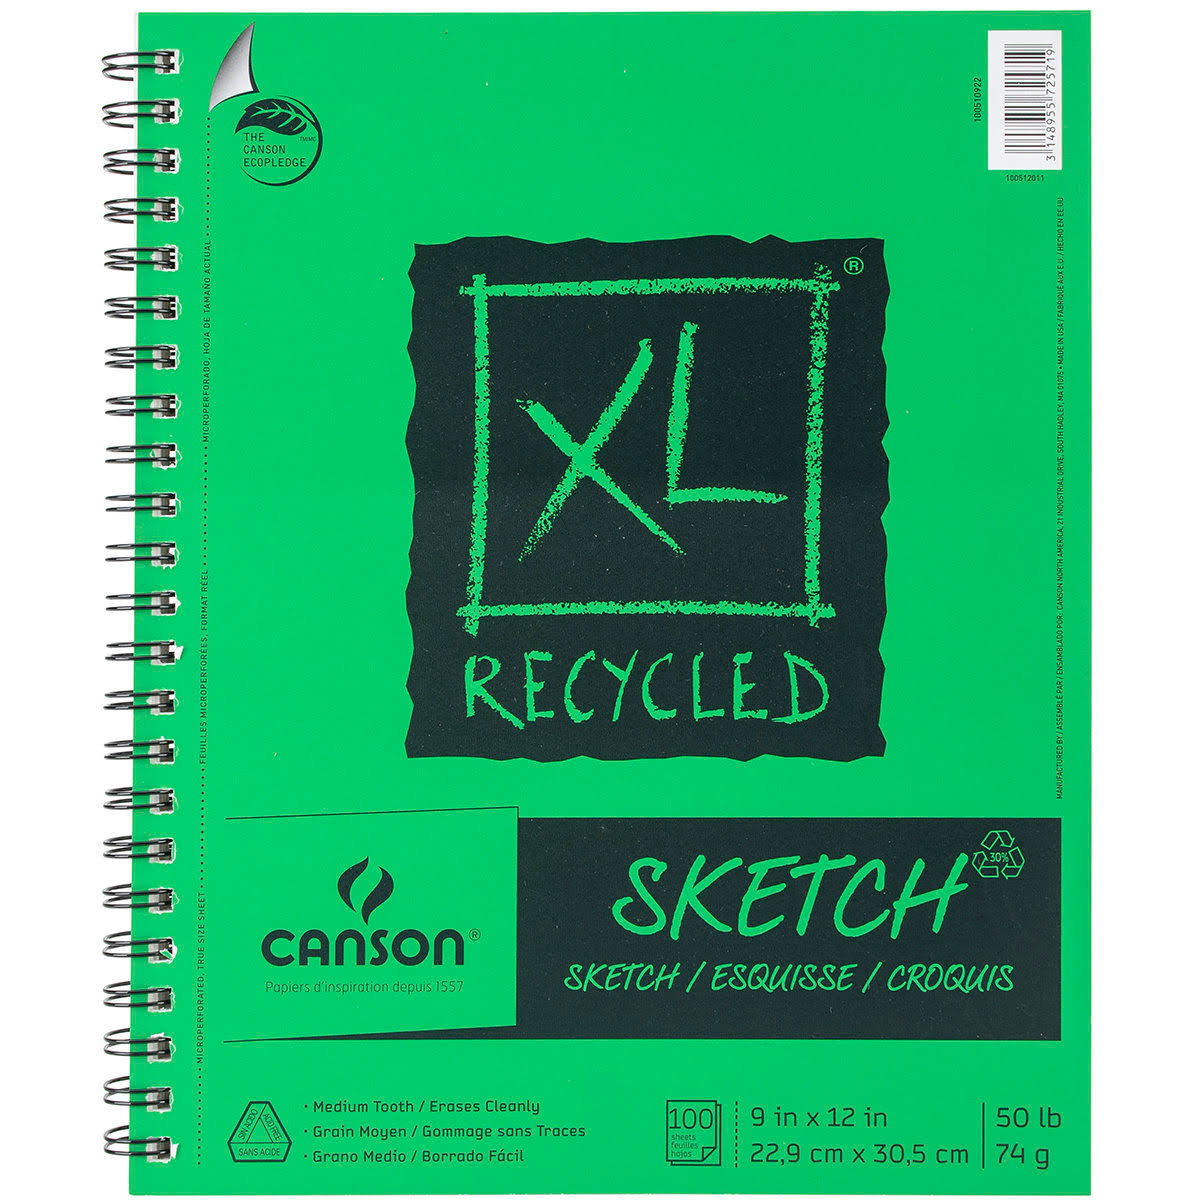 Canson Recycled Sketch Sheet Pad - 9" x 12"